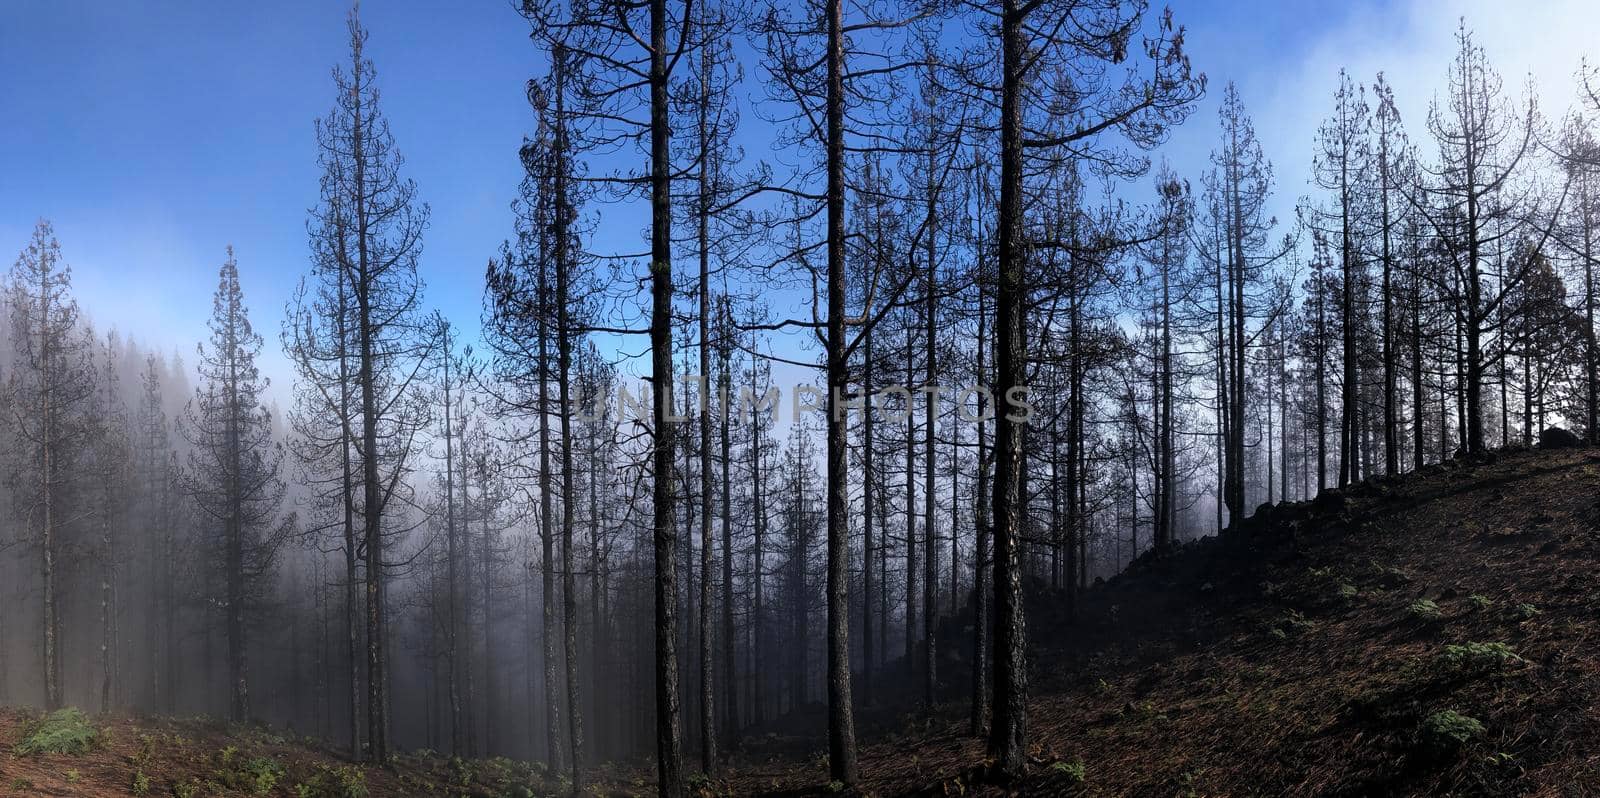 Misty Hiking path through burned forest by traveltelly